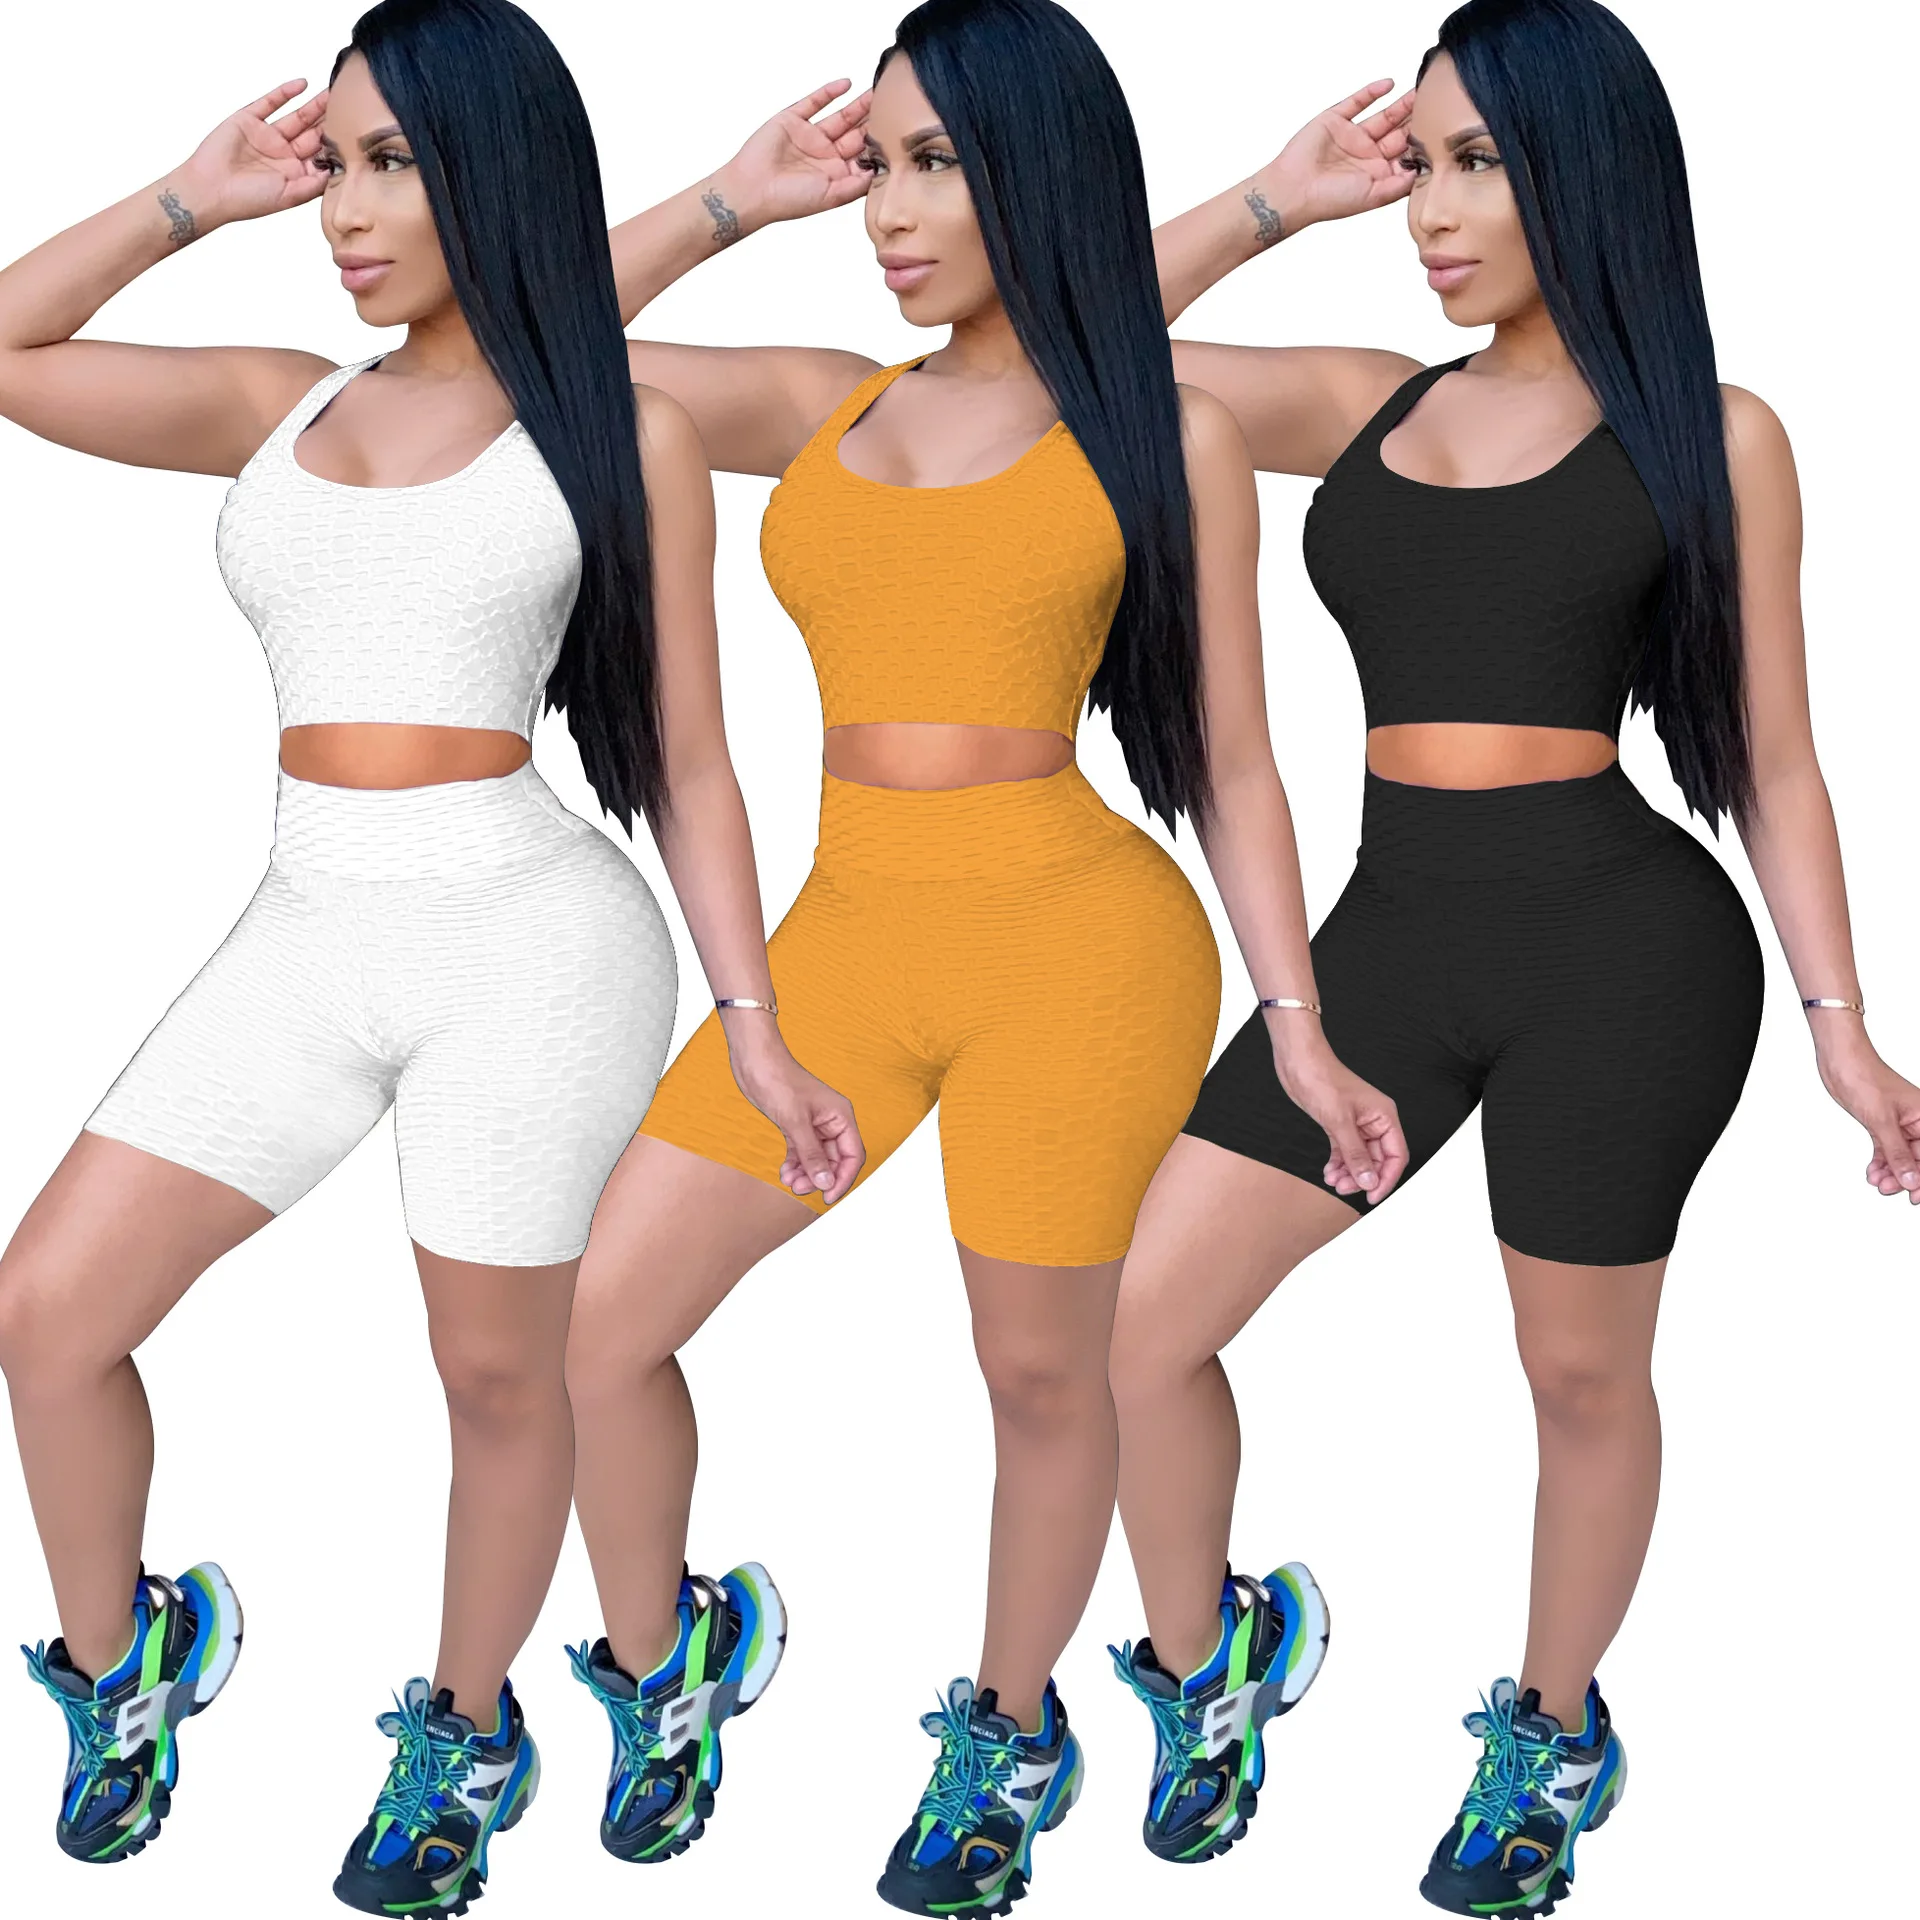 

2021 summer new arrivals plus size Sleeveless bubble sports solid color suit shorts summer yoga set women clothes clothing, Picture shows